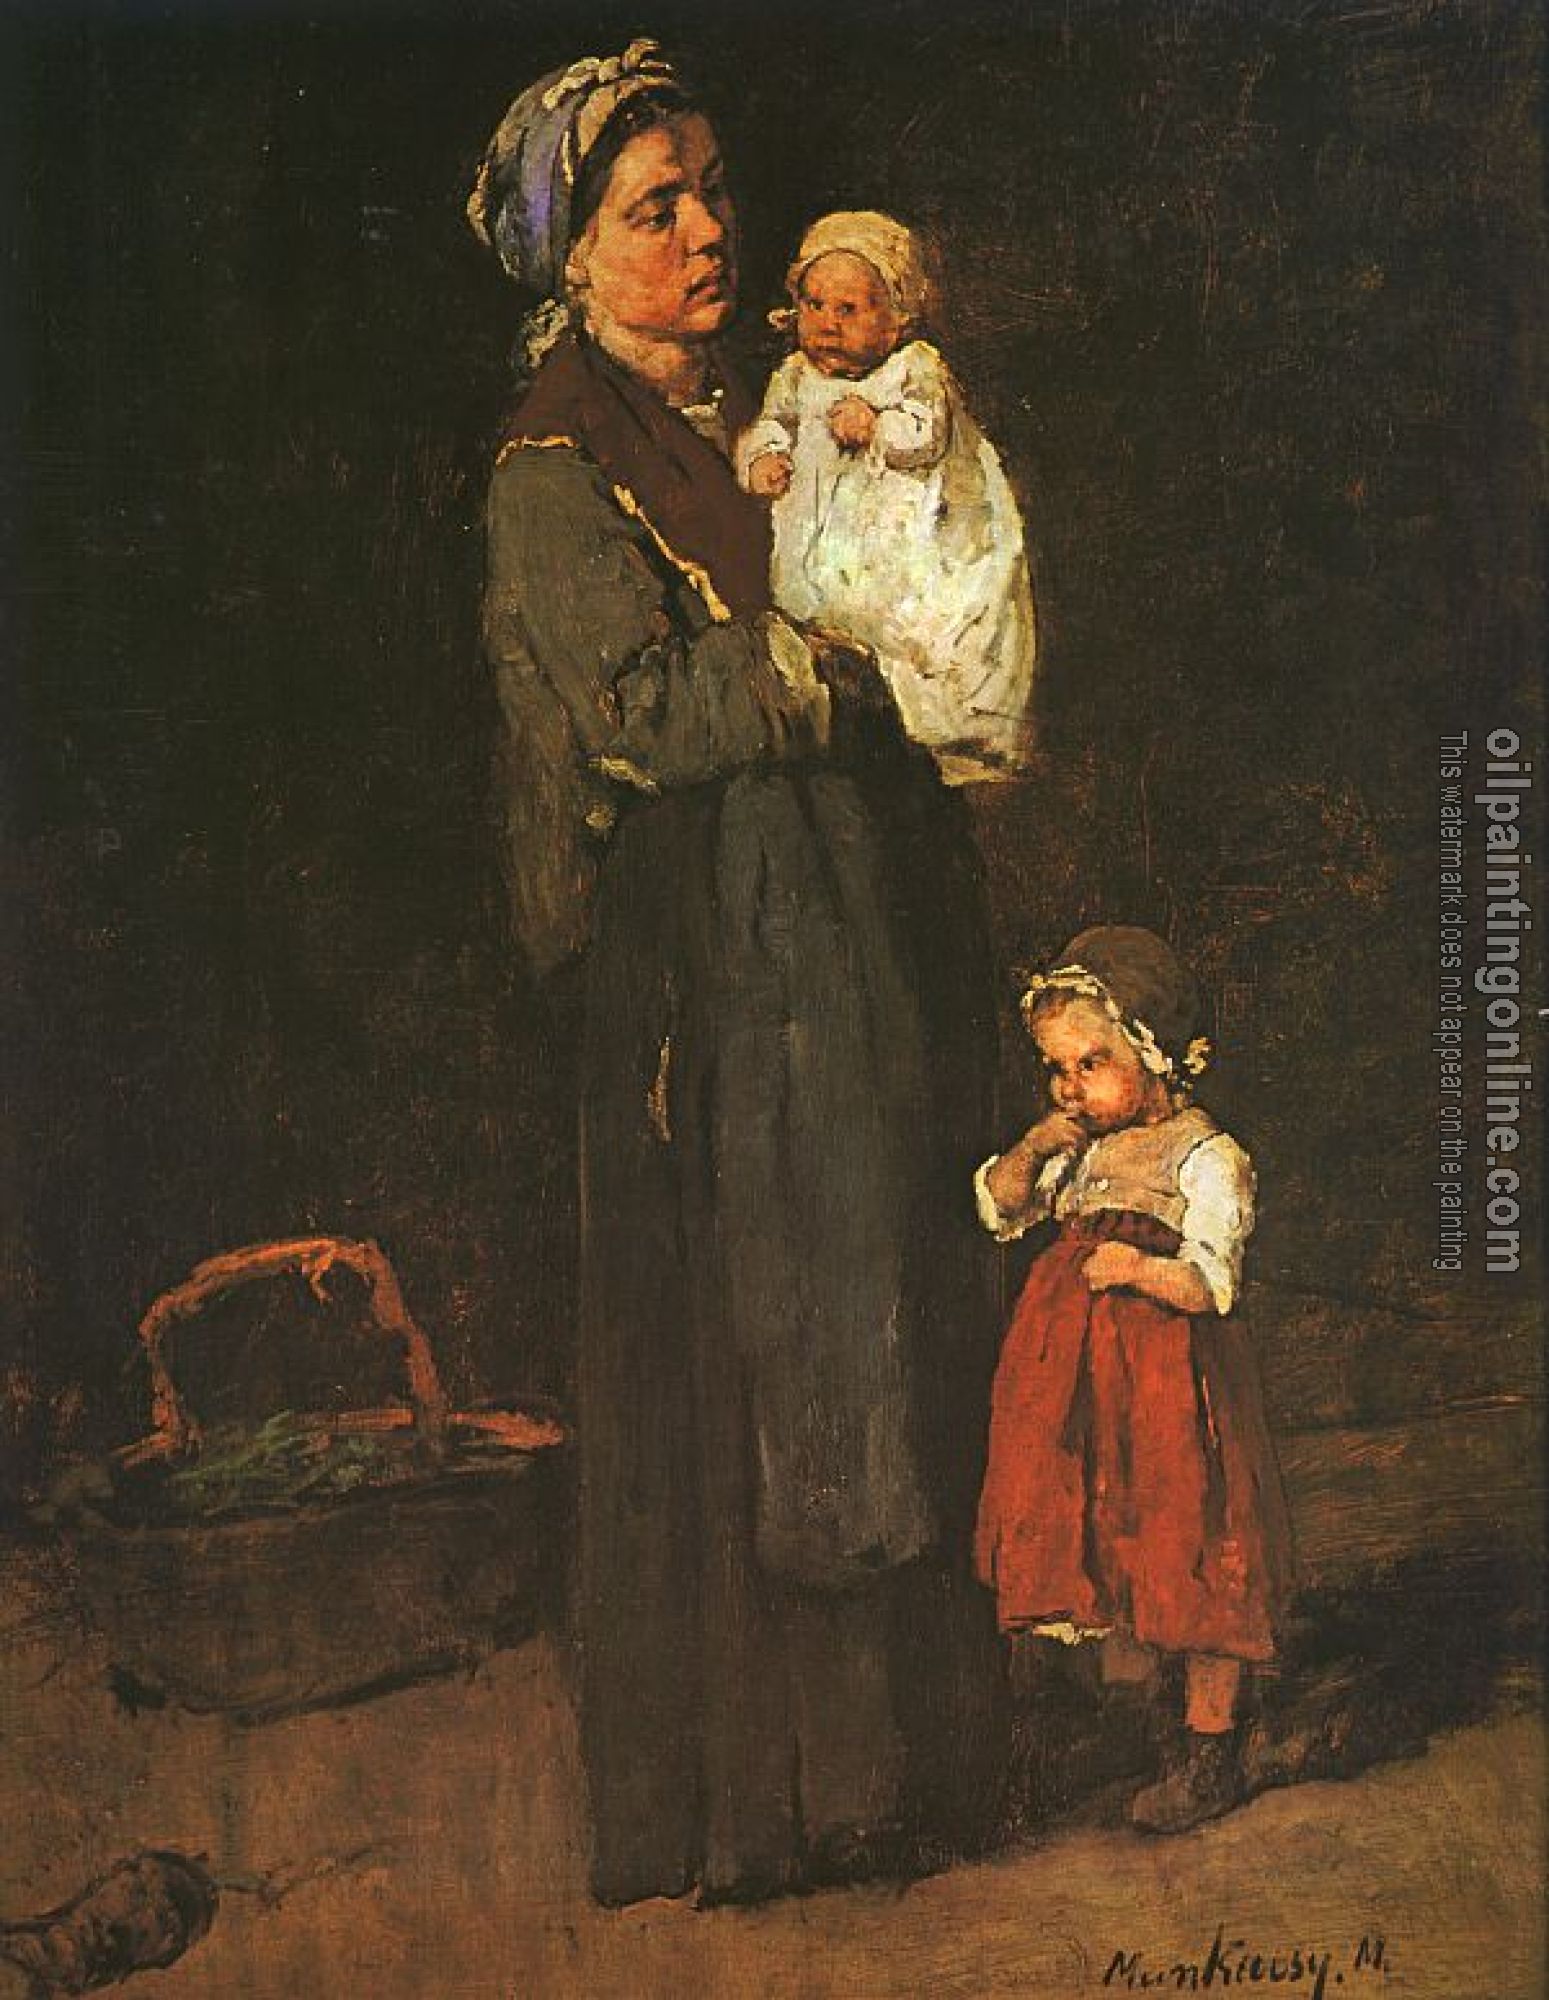 Munkacsy, Mihaly - Mother and Child  study for  The Pawnbrokers Shop